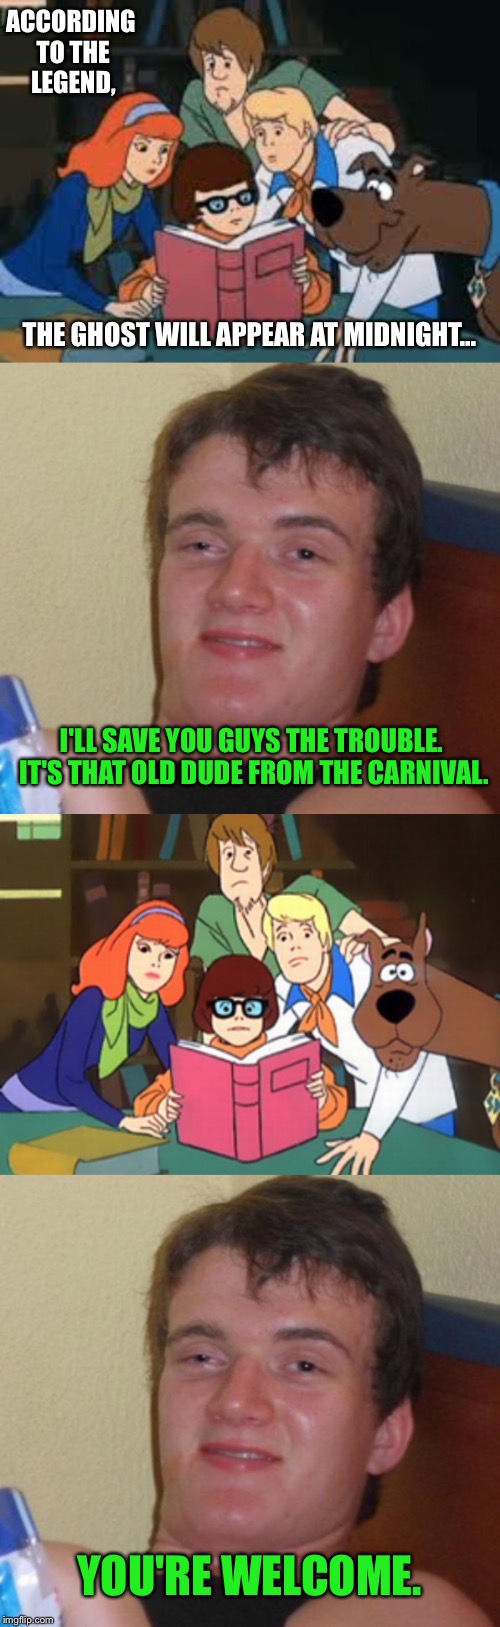 We stoners can be very helpful  | ACCORDING TO THE LEGEND, THE GHOST WILL APPEAR AT MIDNIGHT... I'LL SAVE YOU GUYS THE TROUBLE. IT'S THAT OLD DUDE FROM THE CARNIVAL. YOU'RE WELCOME. | image tagged in scooby doo,10 guy,scooby,shaggy,stoner,pothead | made w/ Imgflip meme maker